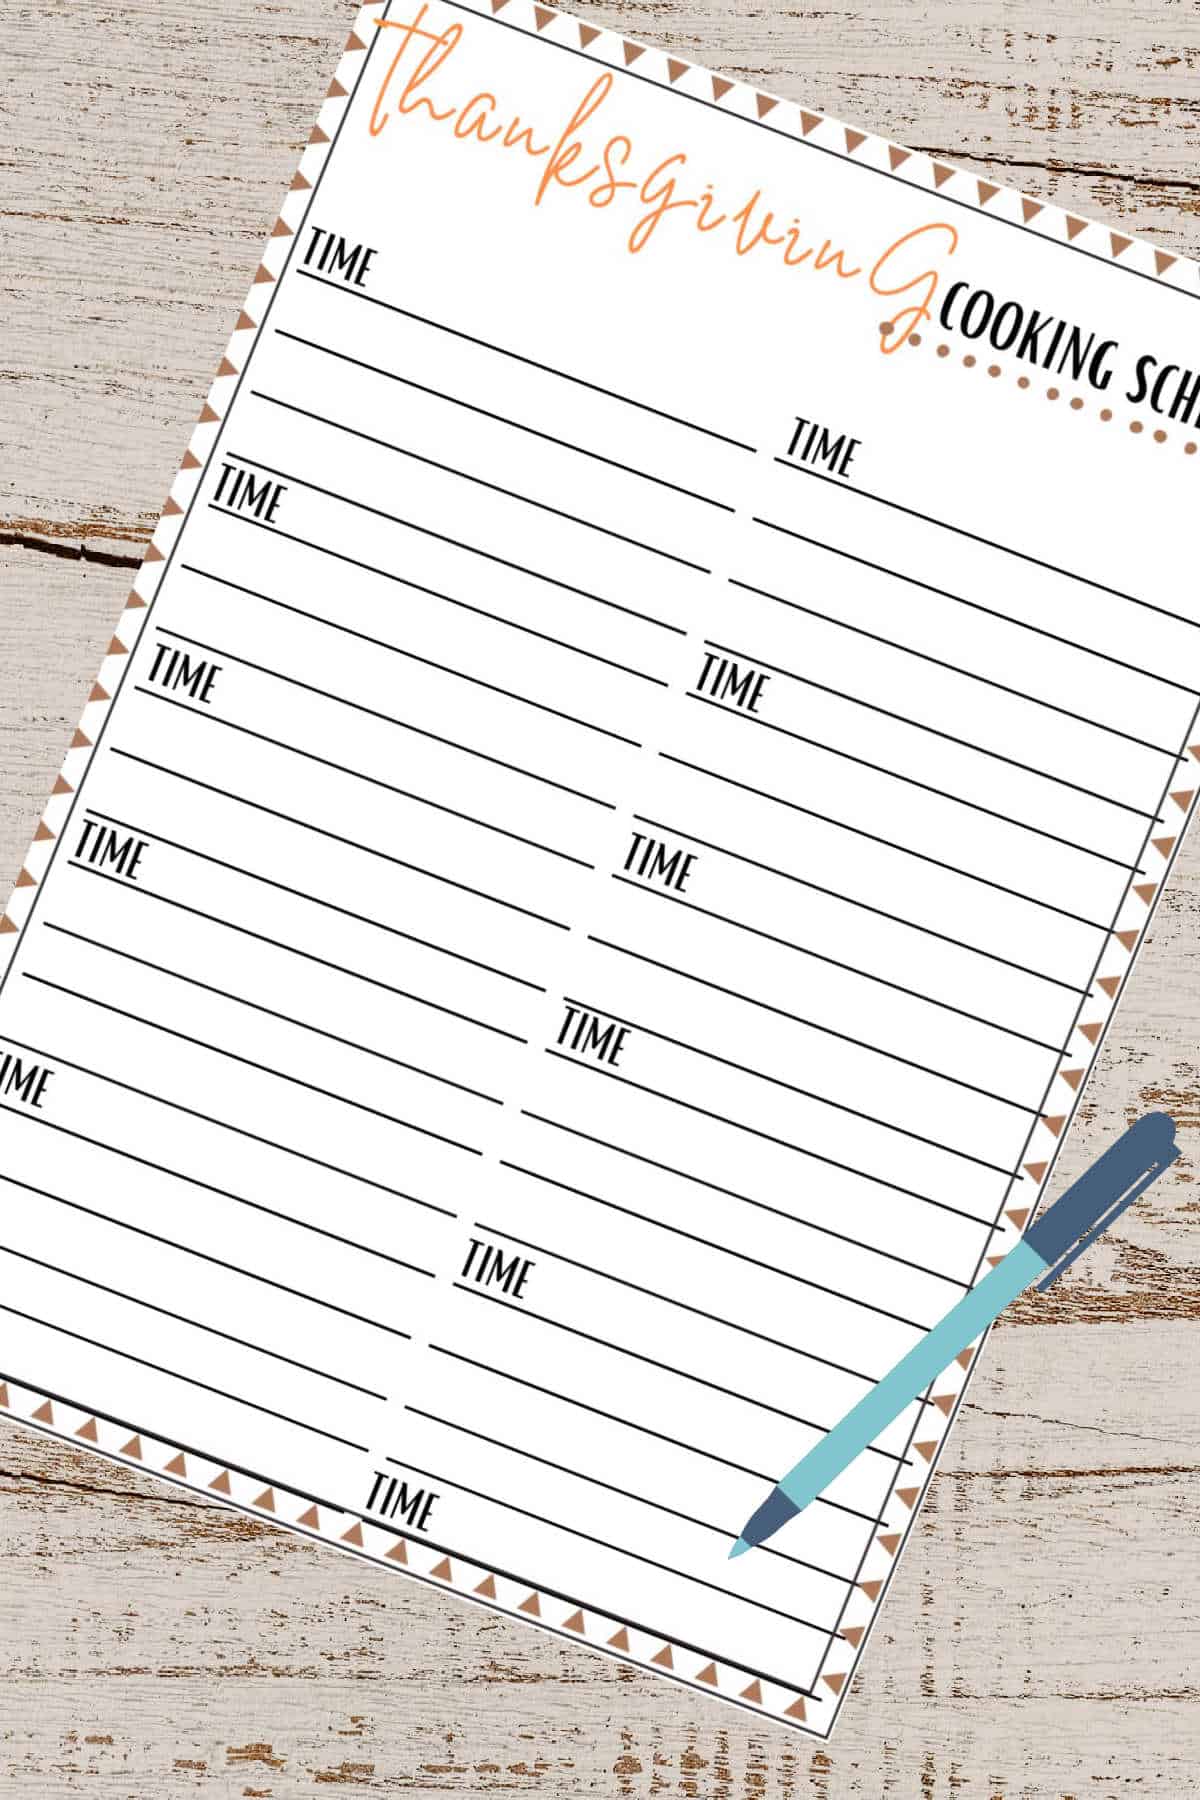 Thanksgiving Day Cooking Schedule Printable